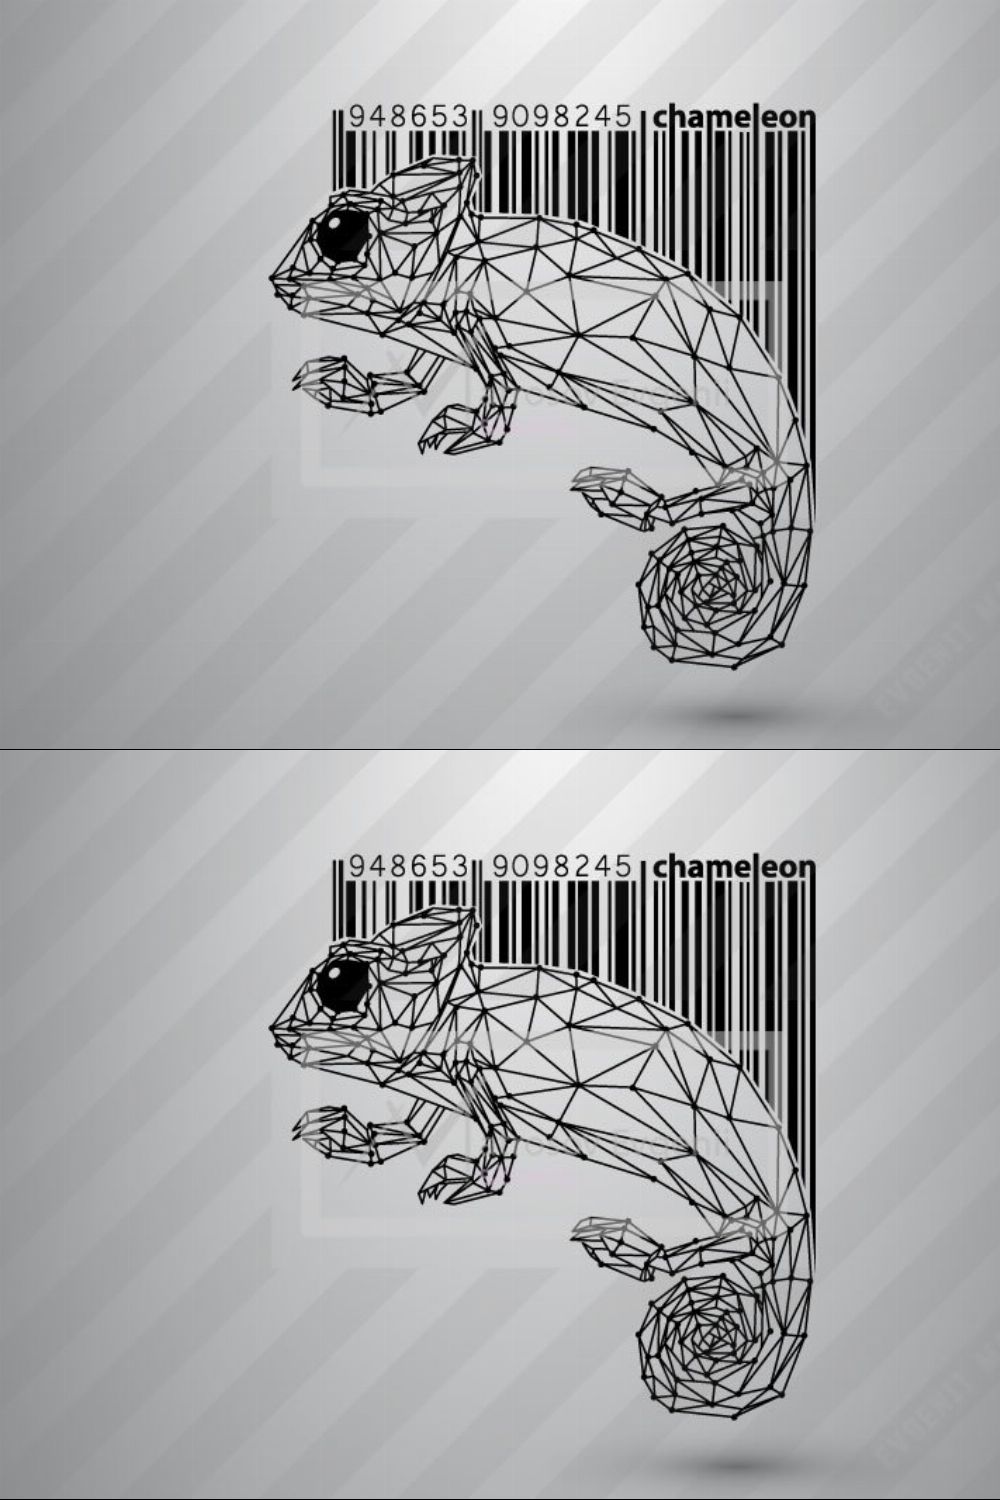 Chameleon from triangles and lines pinterest preview image.